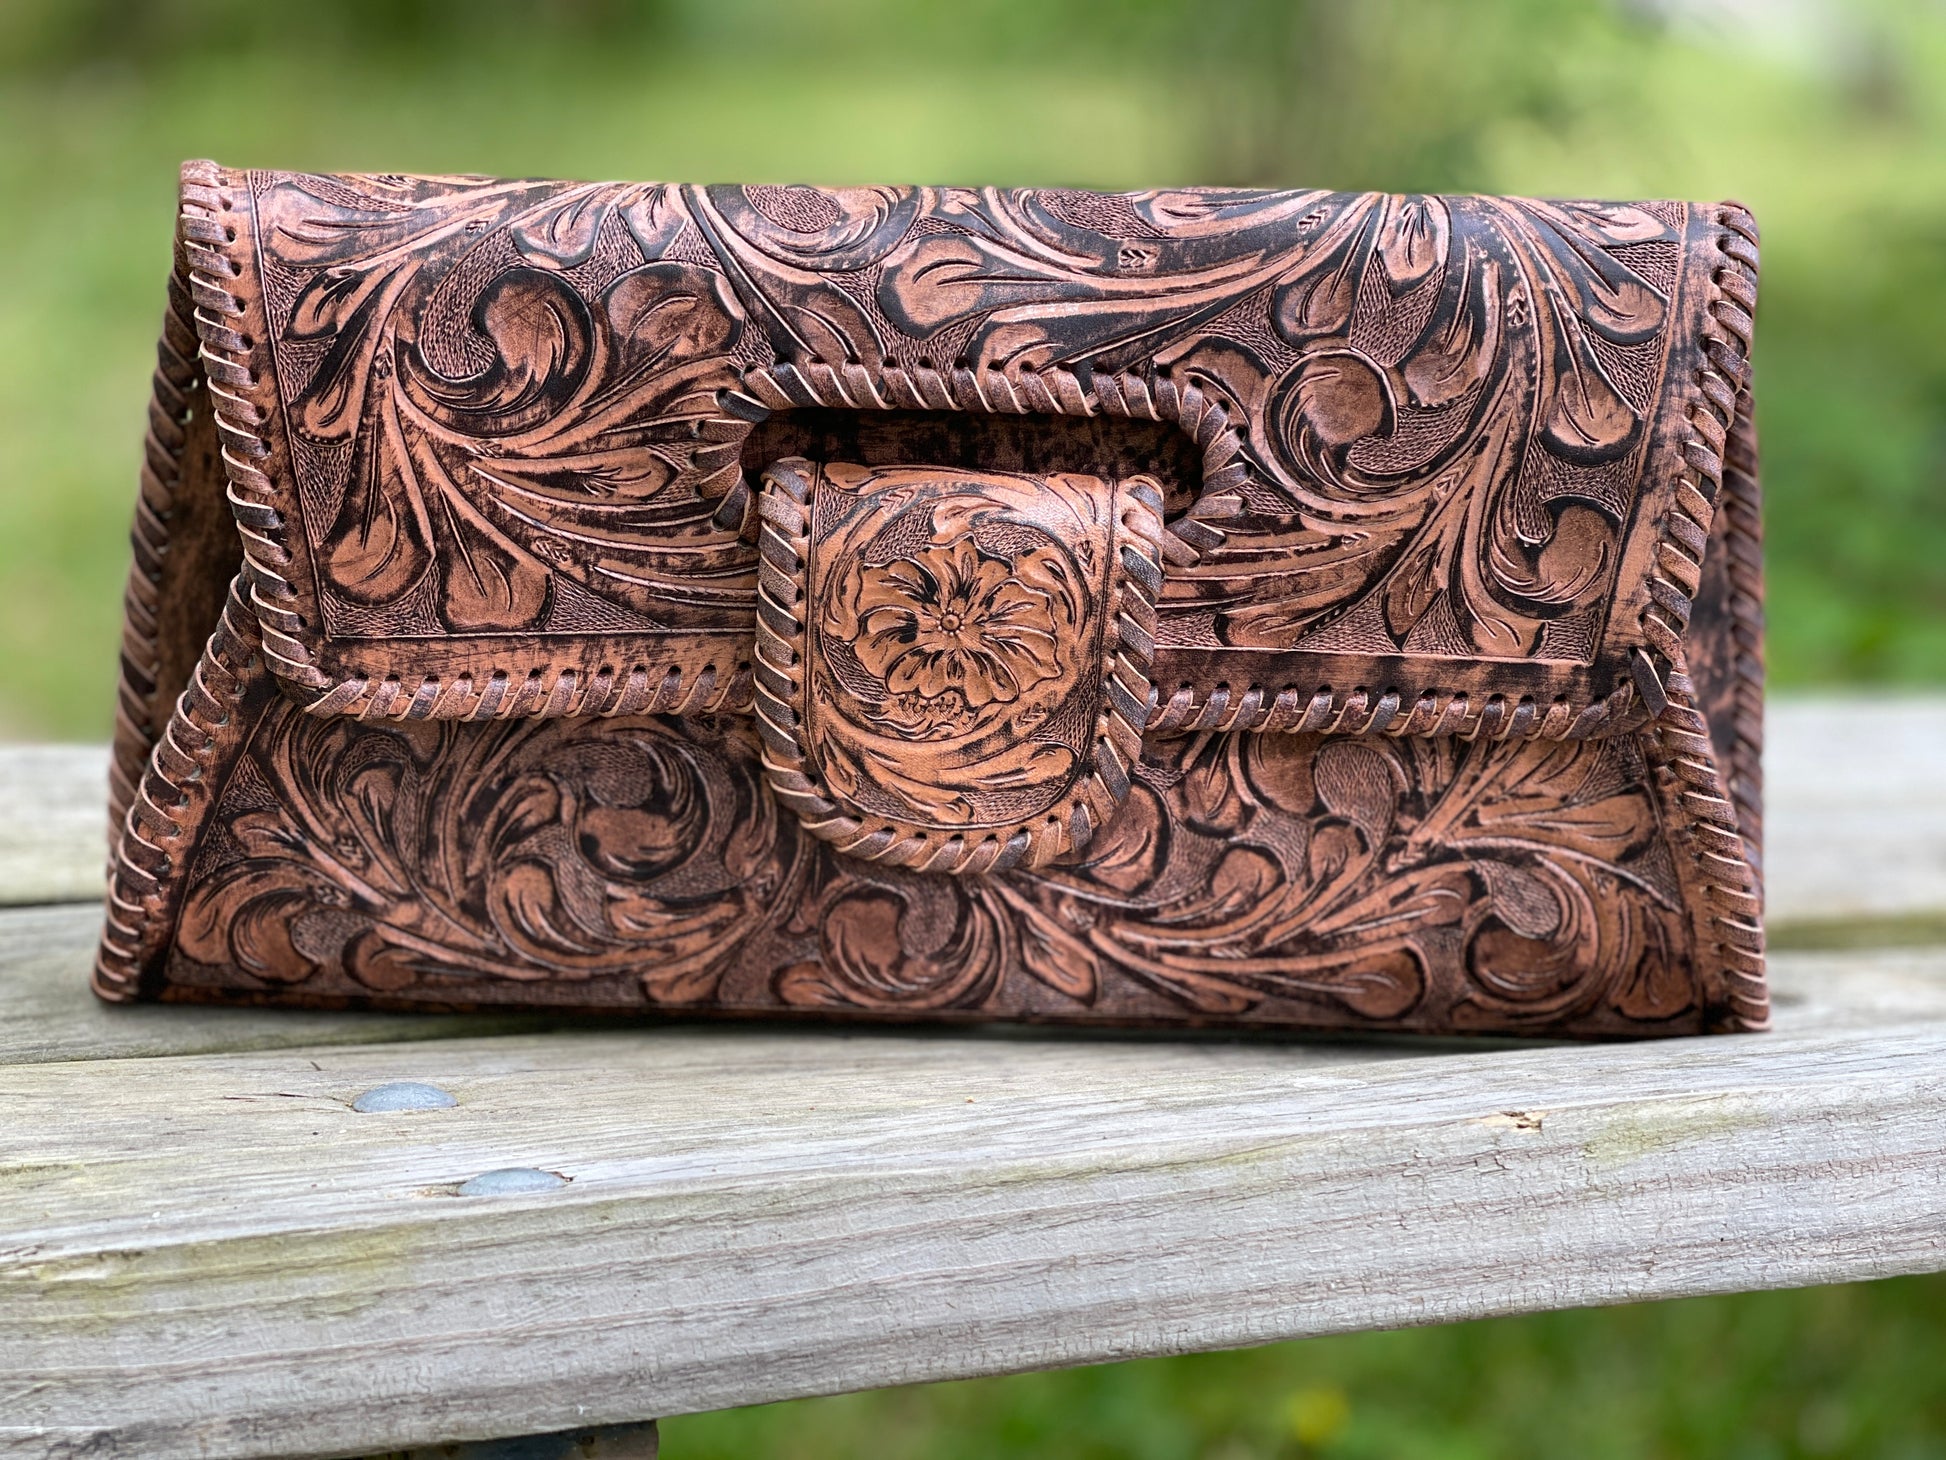 Hand-Tooled Leather Large Crossbody Clutch "LENGUETA" by ALLE - ALLE Handbags